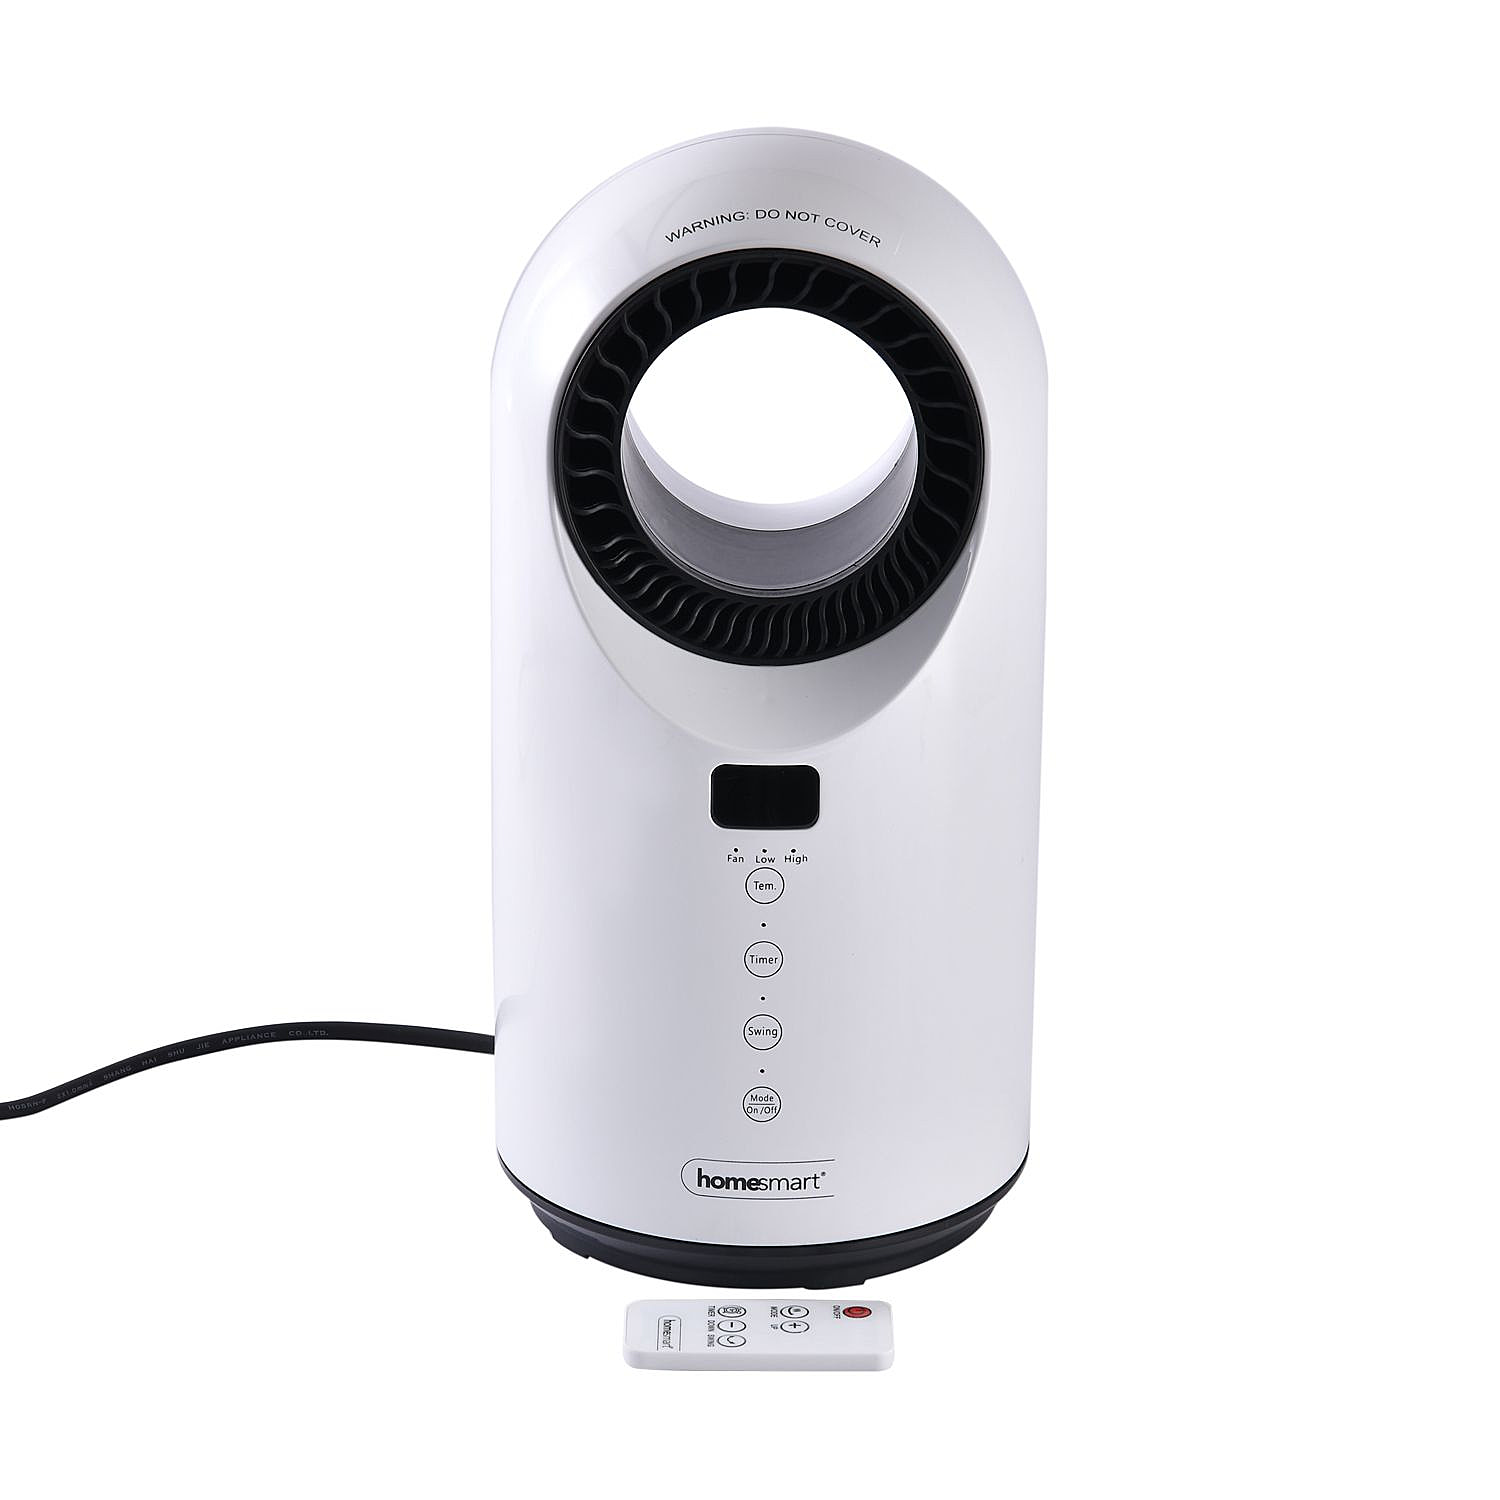 Homesmart 2 in 1 Heater and Fan with Remote Control Suppoting 60 Degree Wide Angle Oscillation with LED indicator Display 